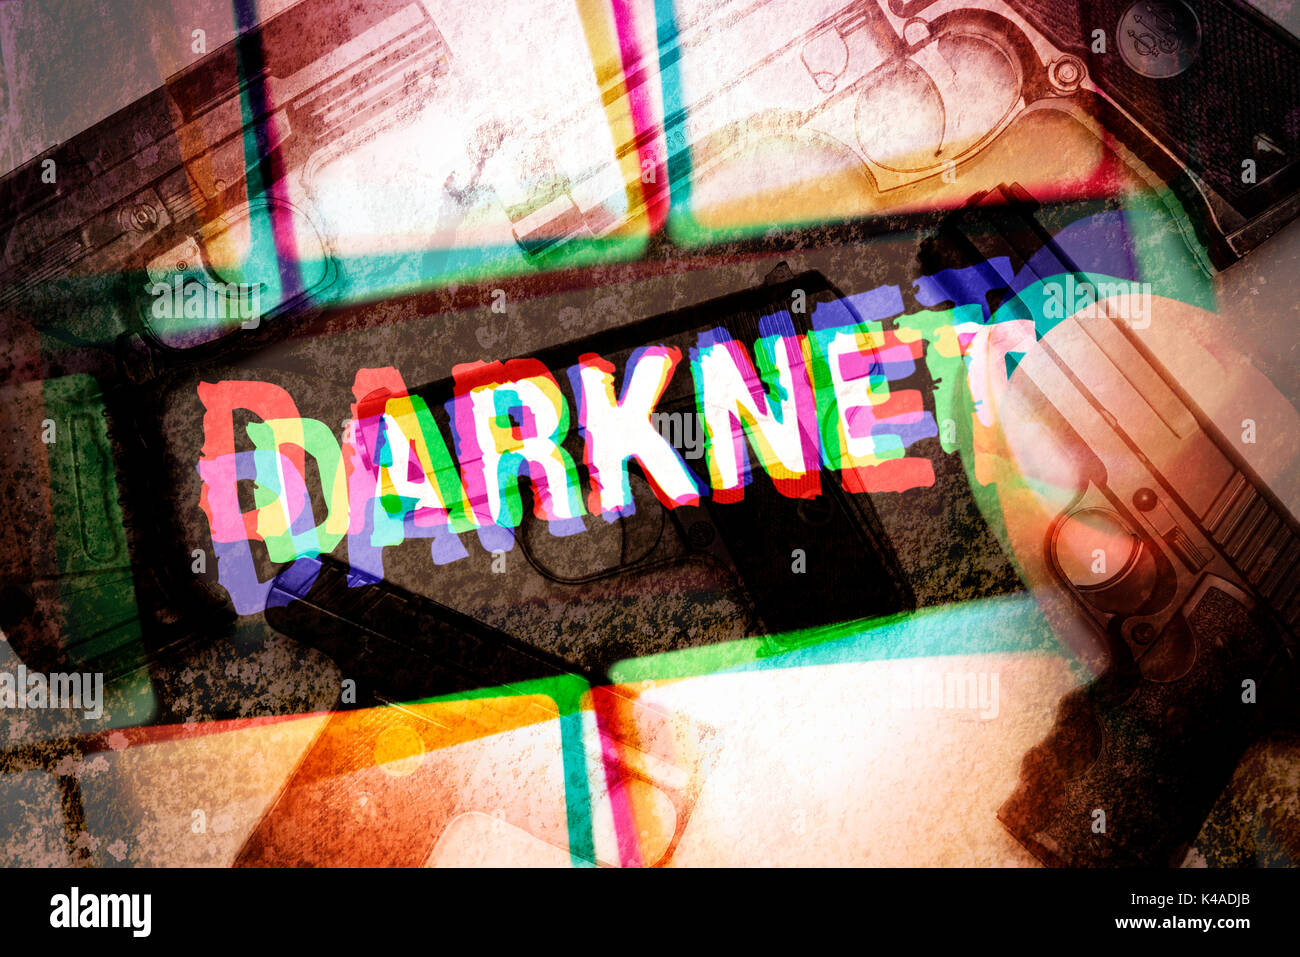 What Darknet Markets Are Available